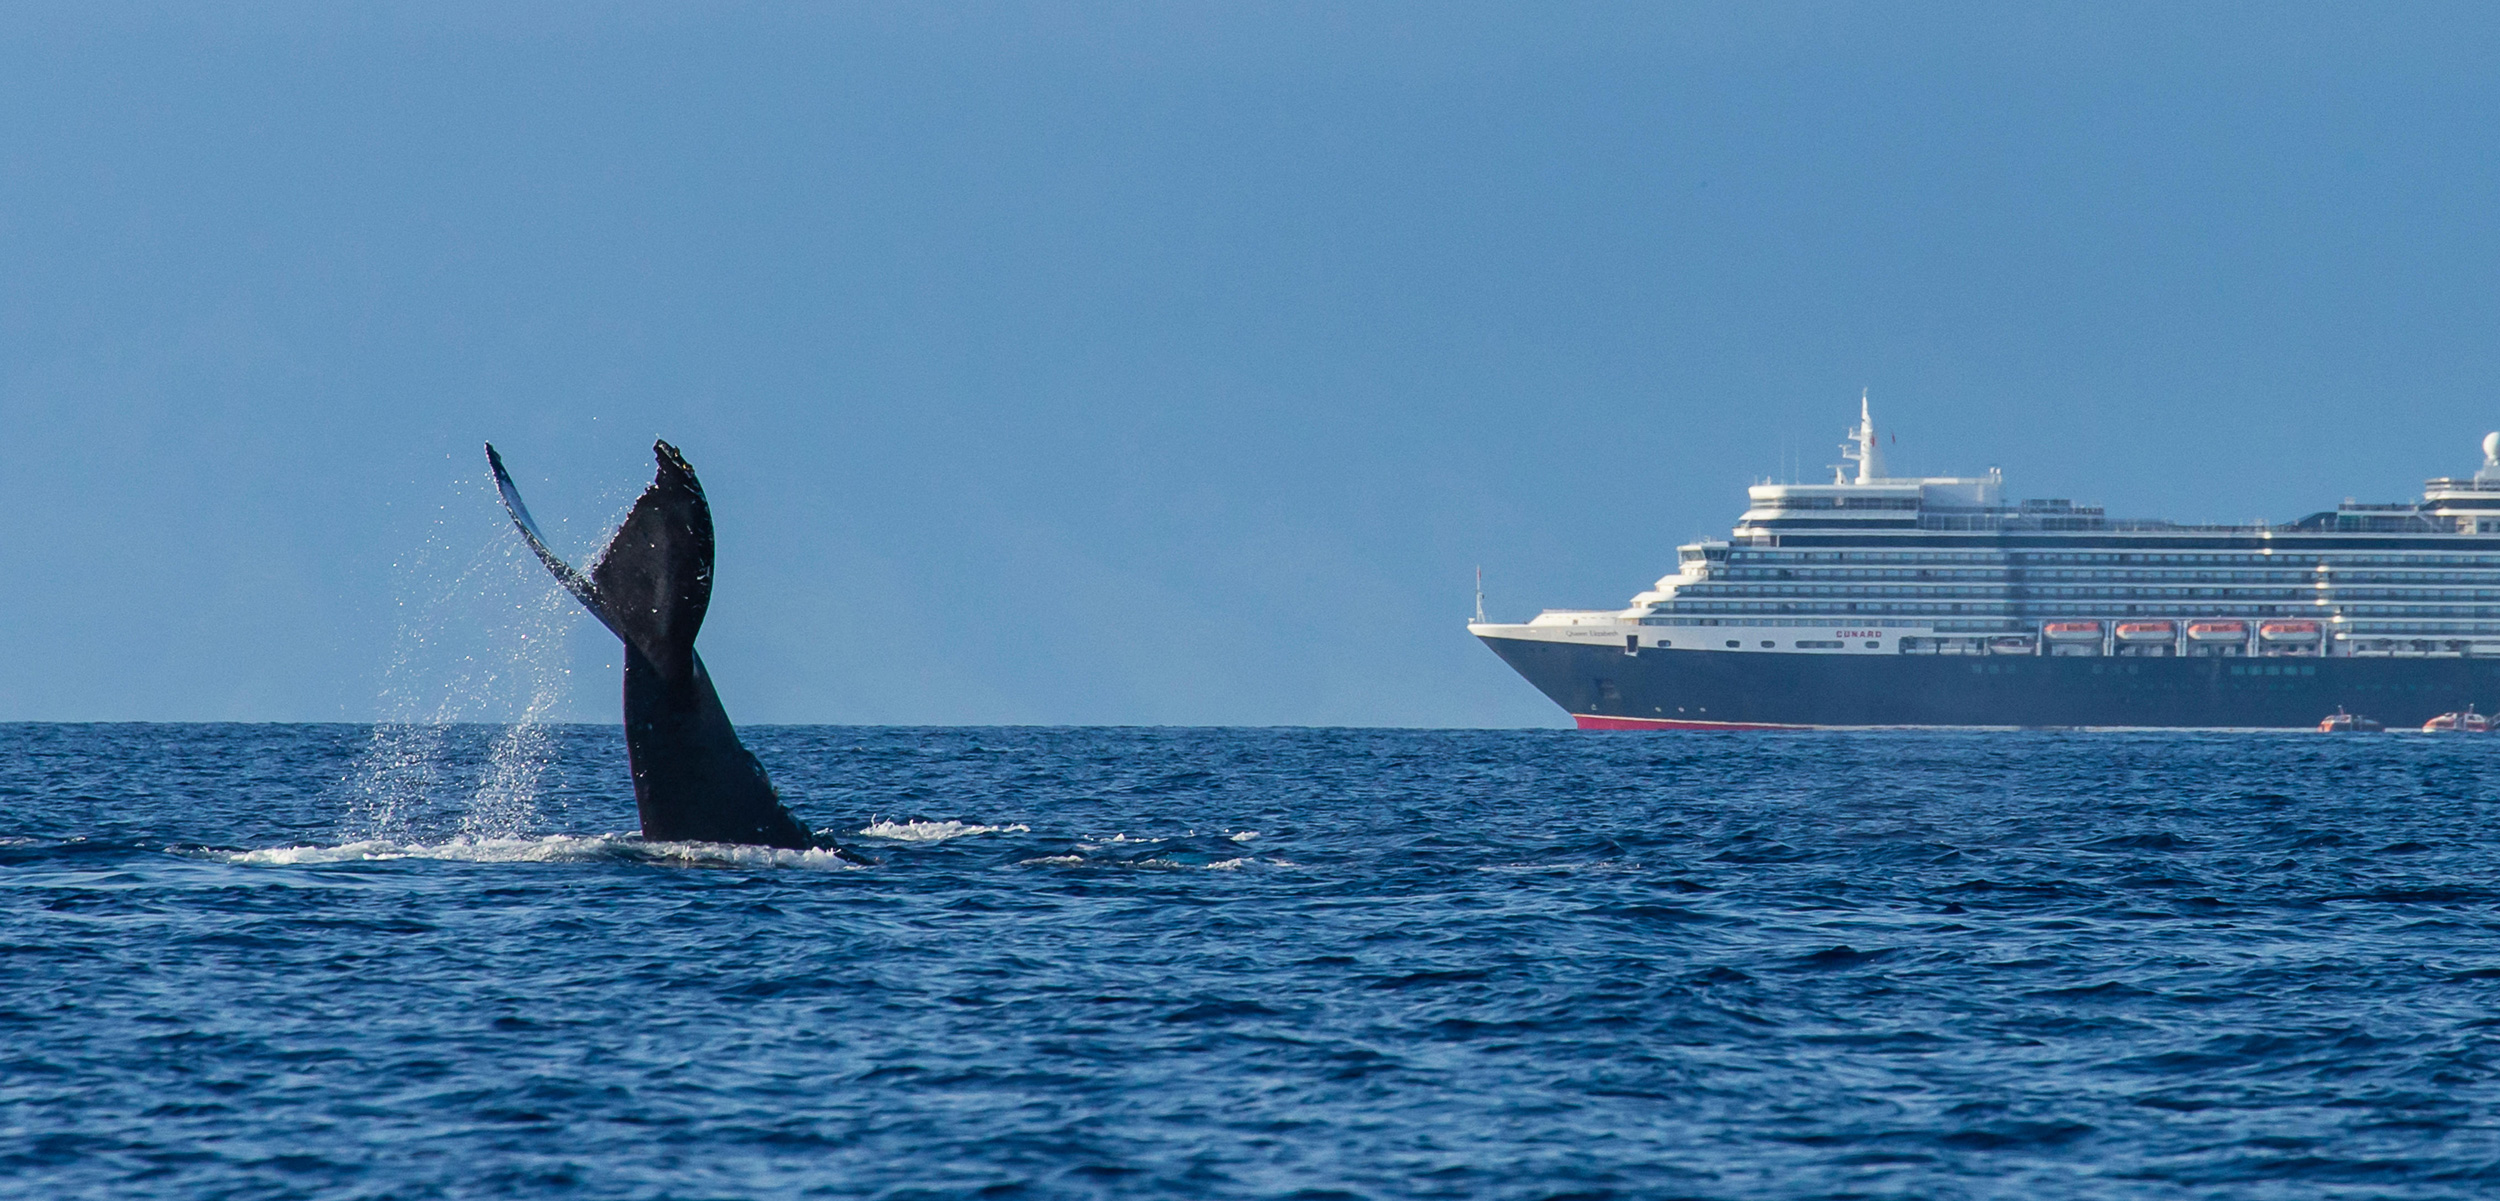 It’s not always clear why whales don’t—or can’t—avoid large ships, but studies and necropsies are helping scientists better understand why ship strikes happen and how they can be avoided. Photo by National Geographic Creative/Alamy Stock Photo